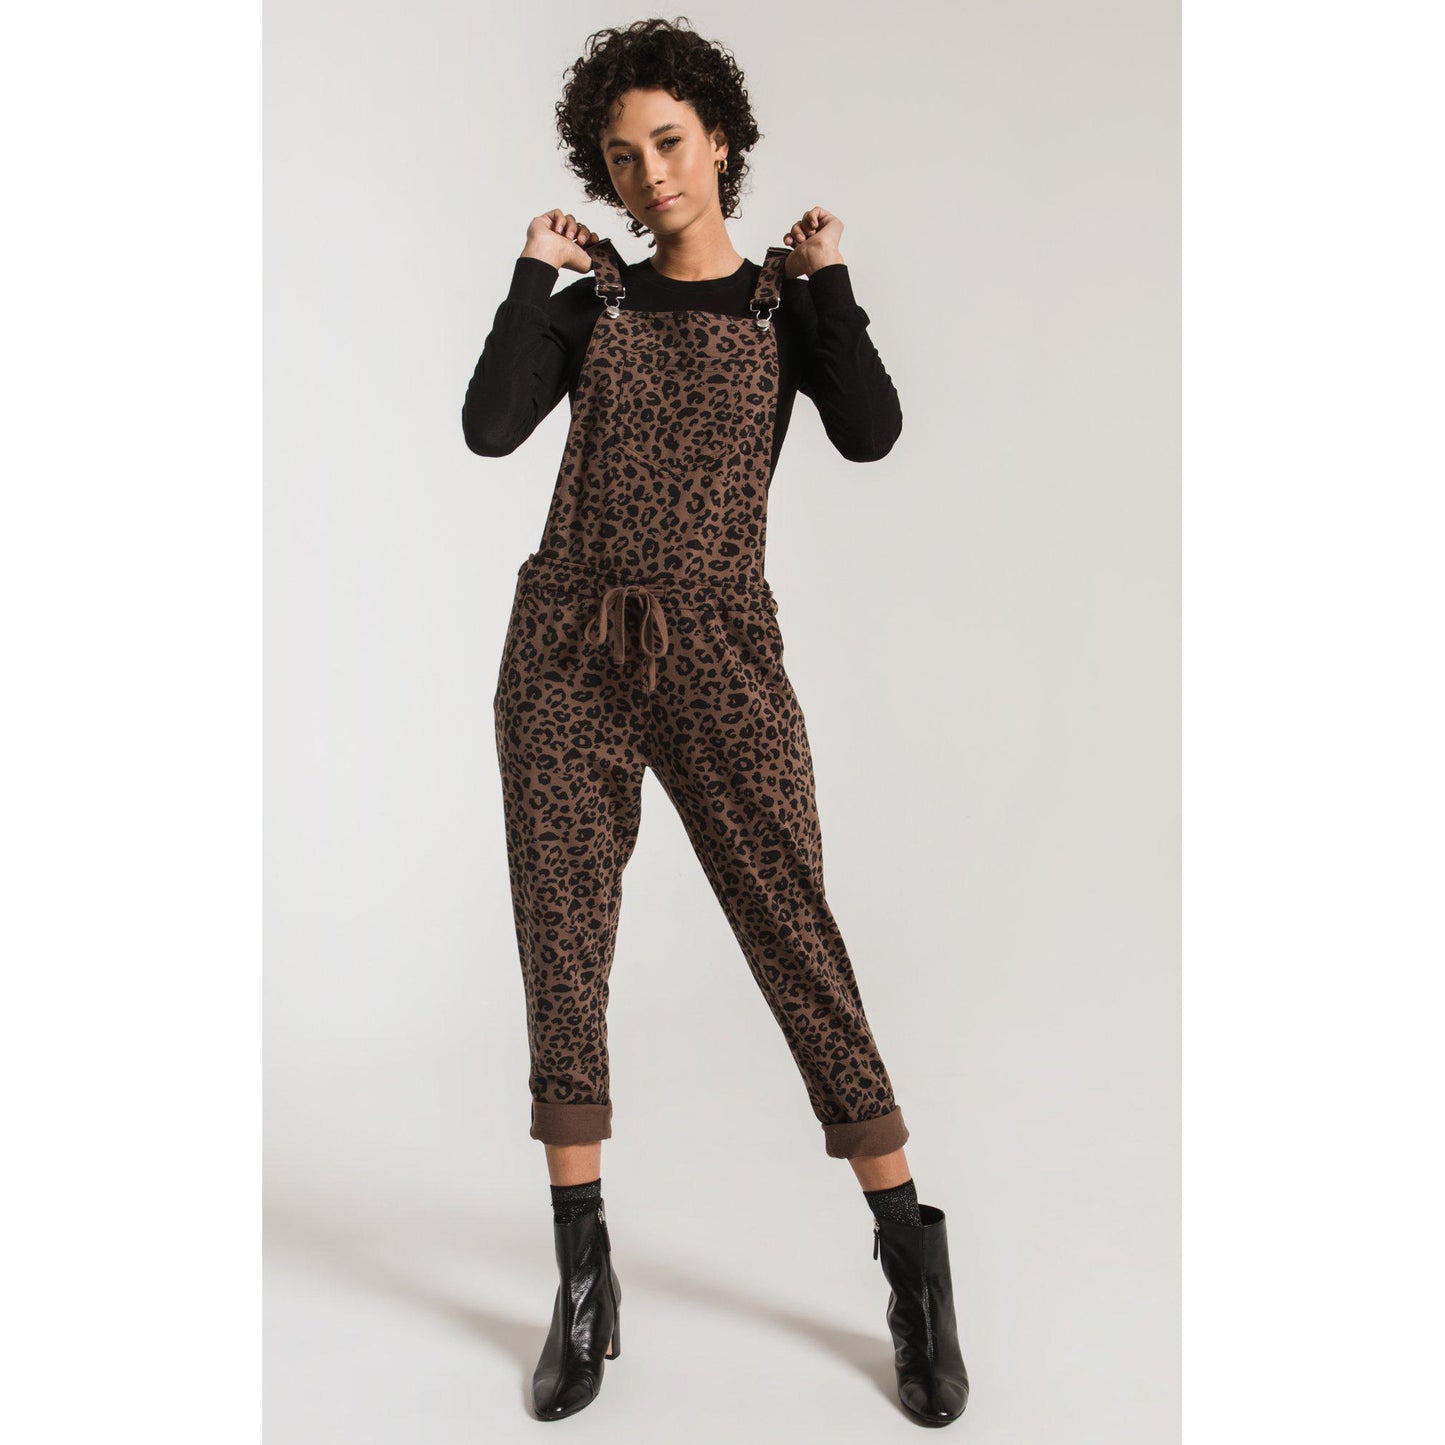 The Leopard Overalls